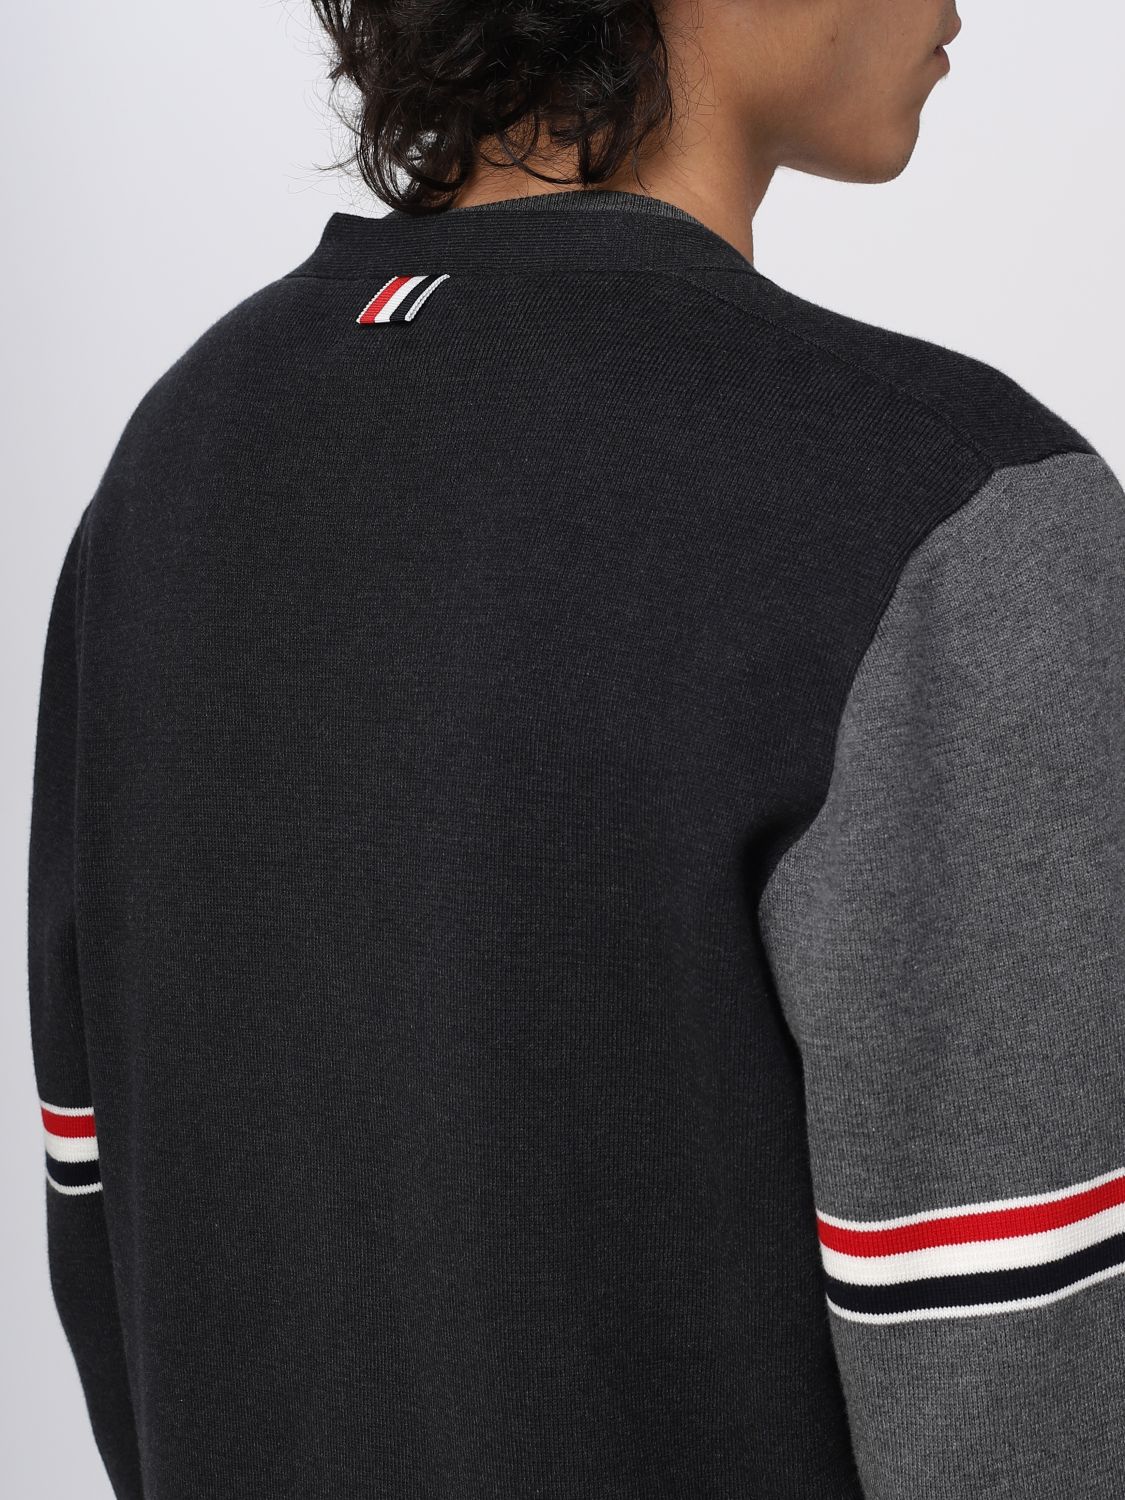 THOM BROWNE: sweater for man - Grey | Thom Browne sweater MKC311FY3007 ...